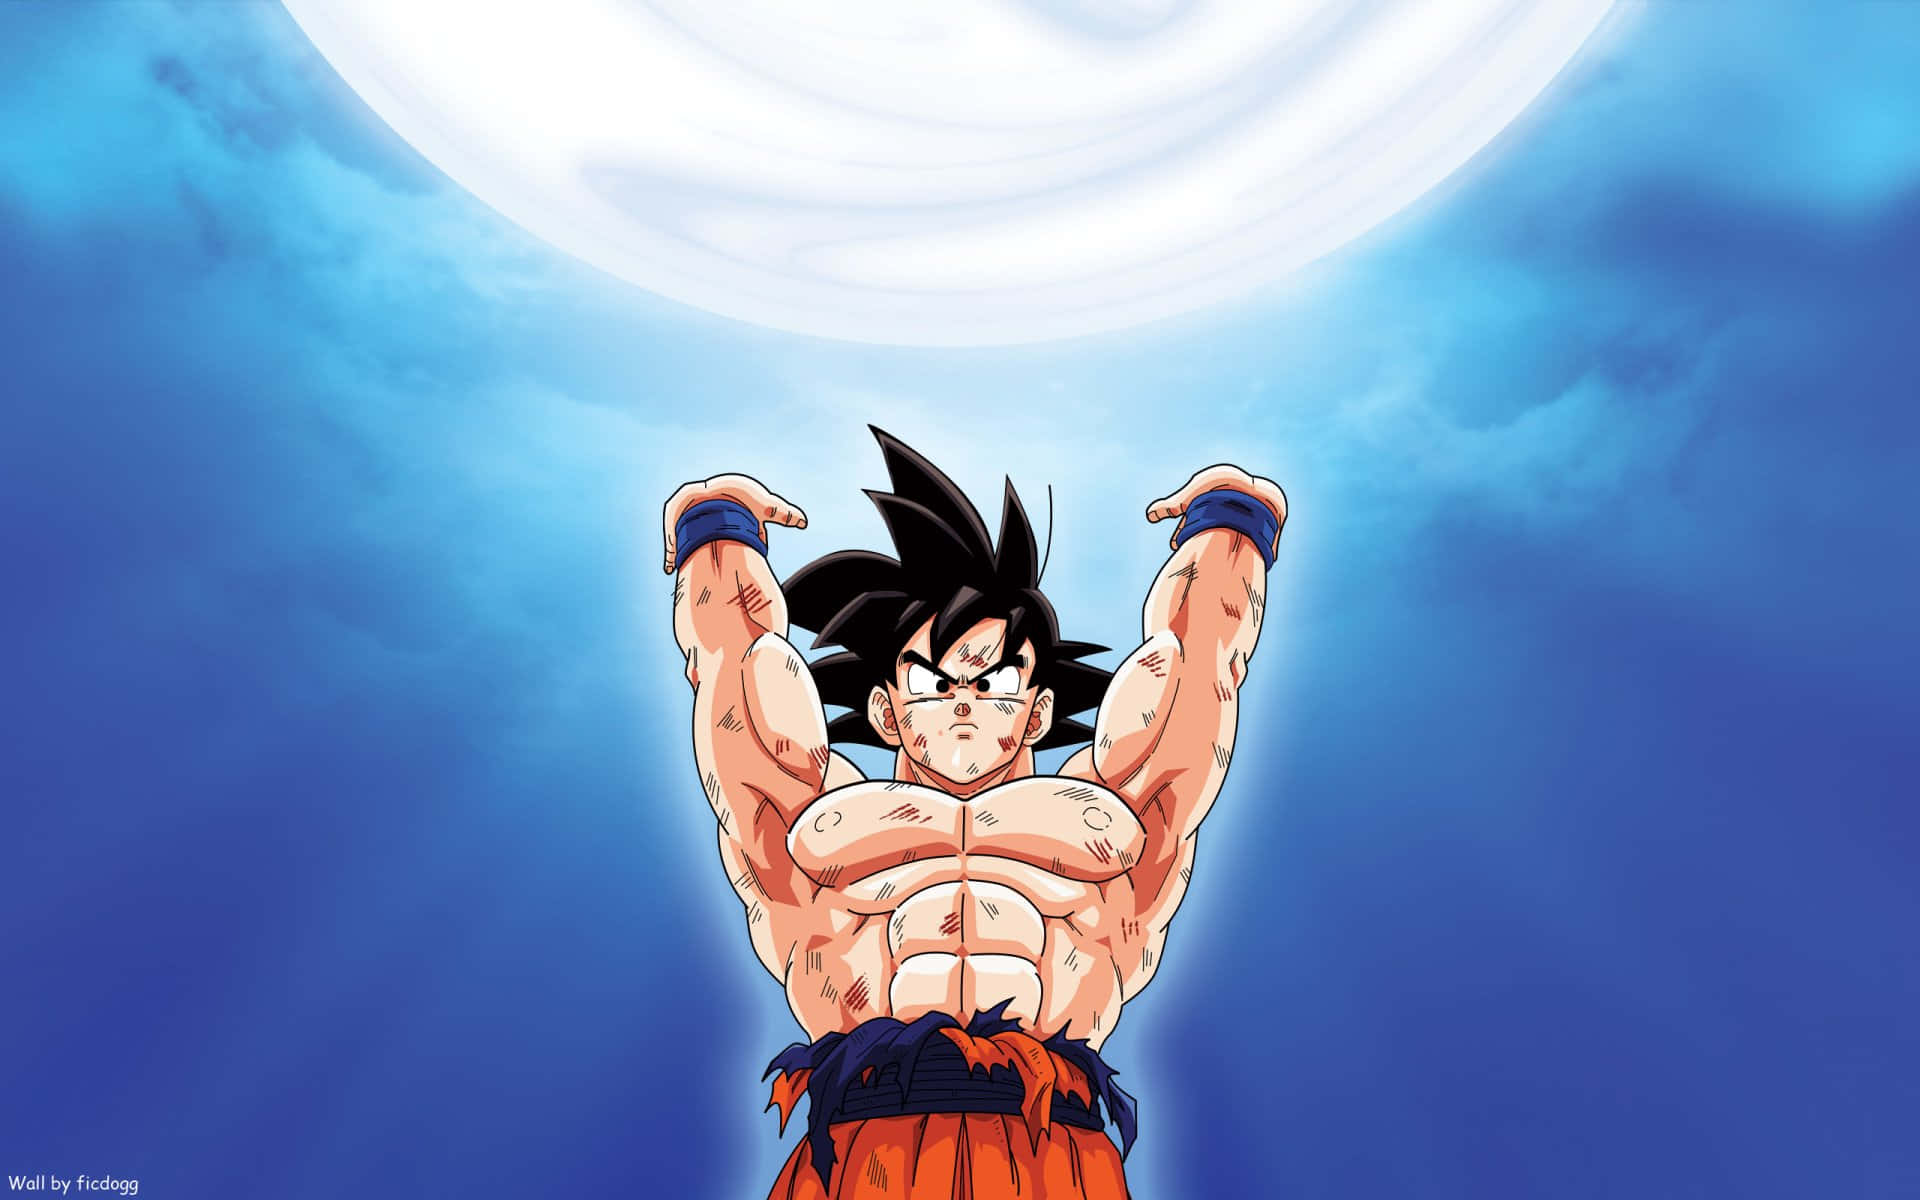 Picture Of Goku Holding Up And Energy Ball